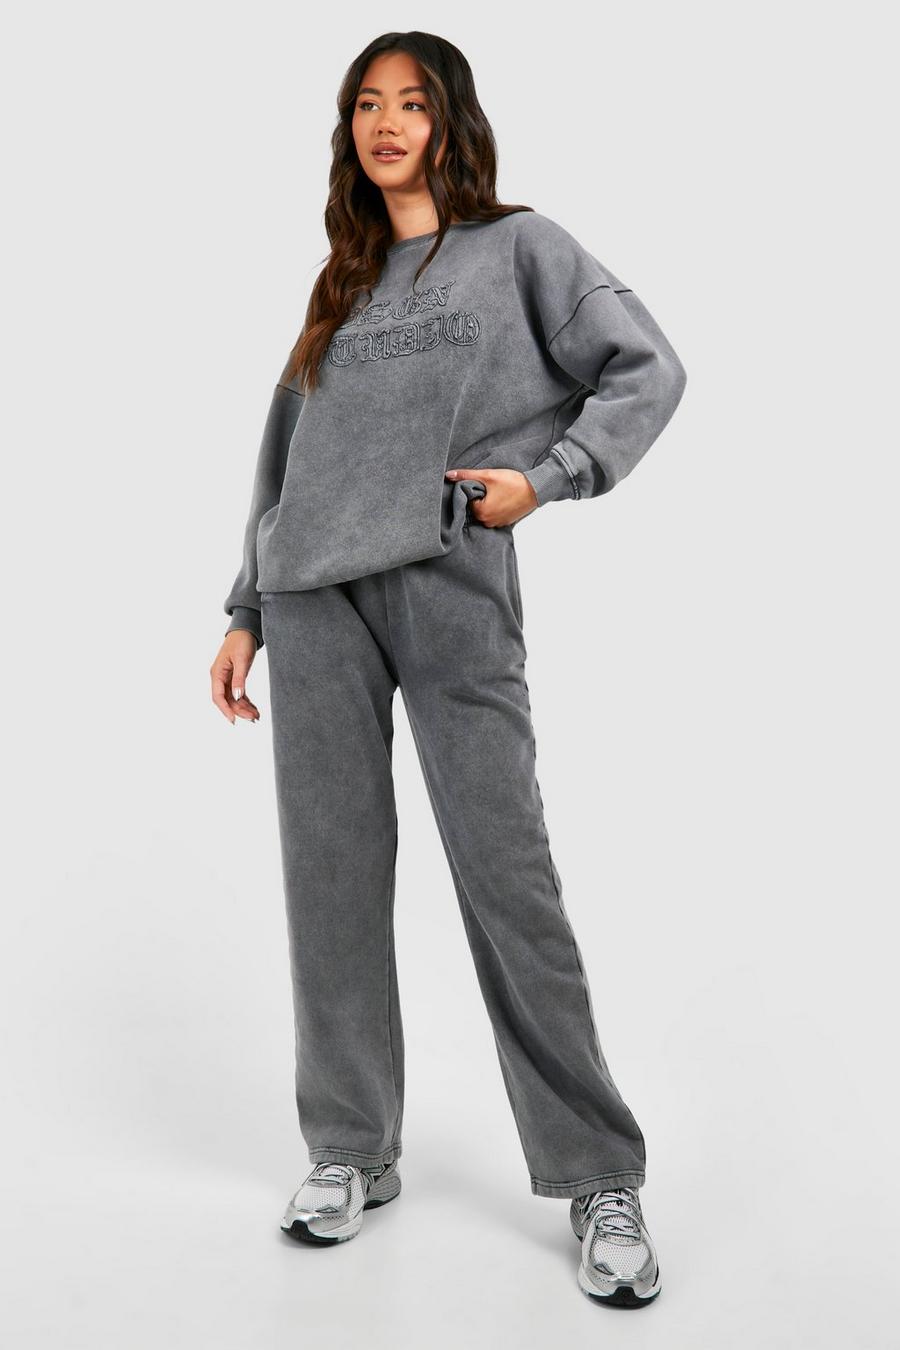 Charcoal gris Dsgn Studio Self Fabric Applique Washed Straight Leg Jogger